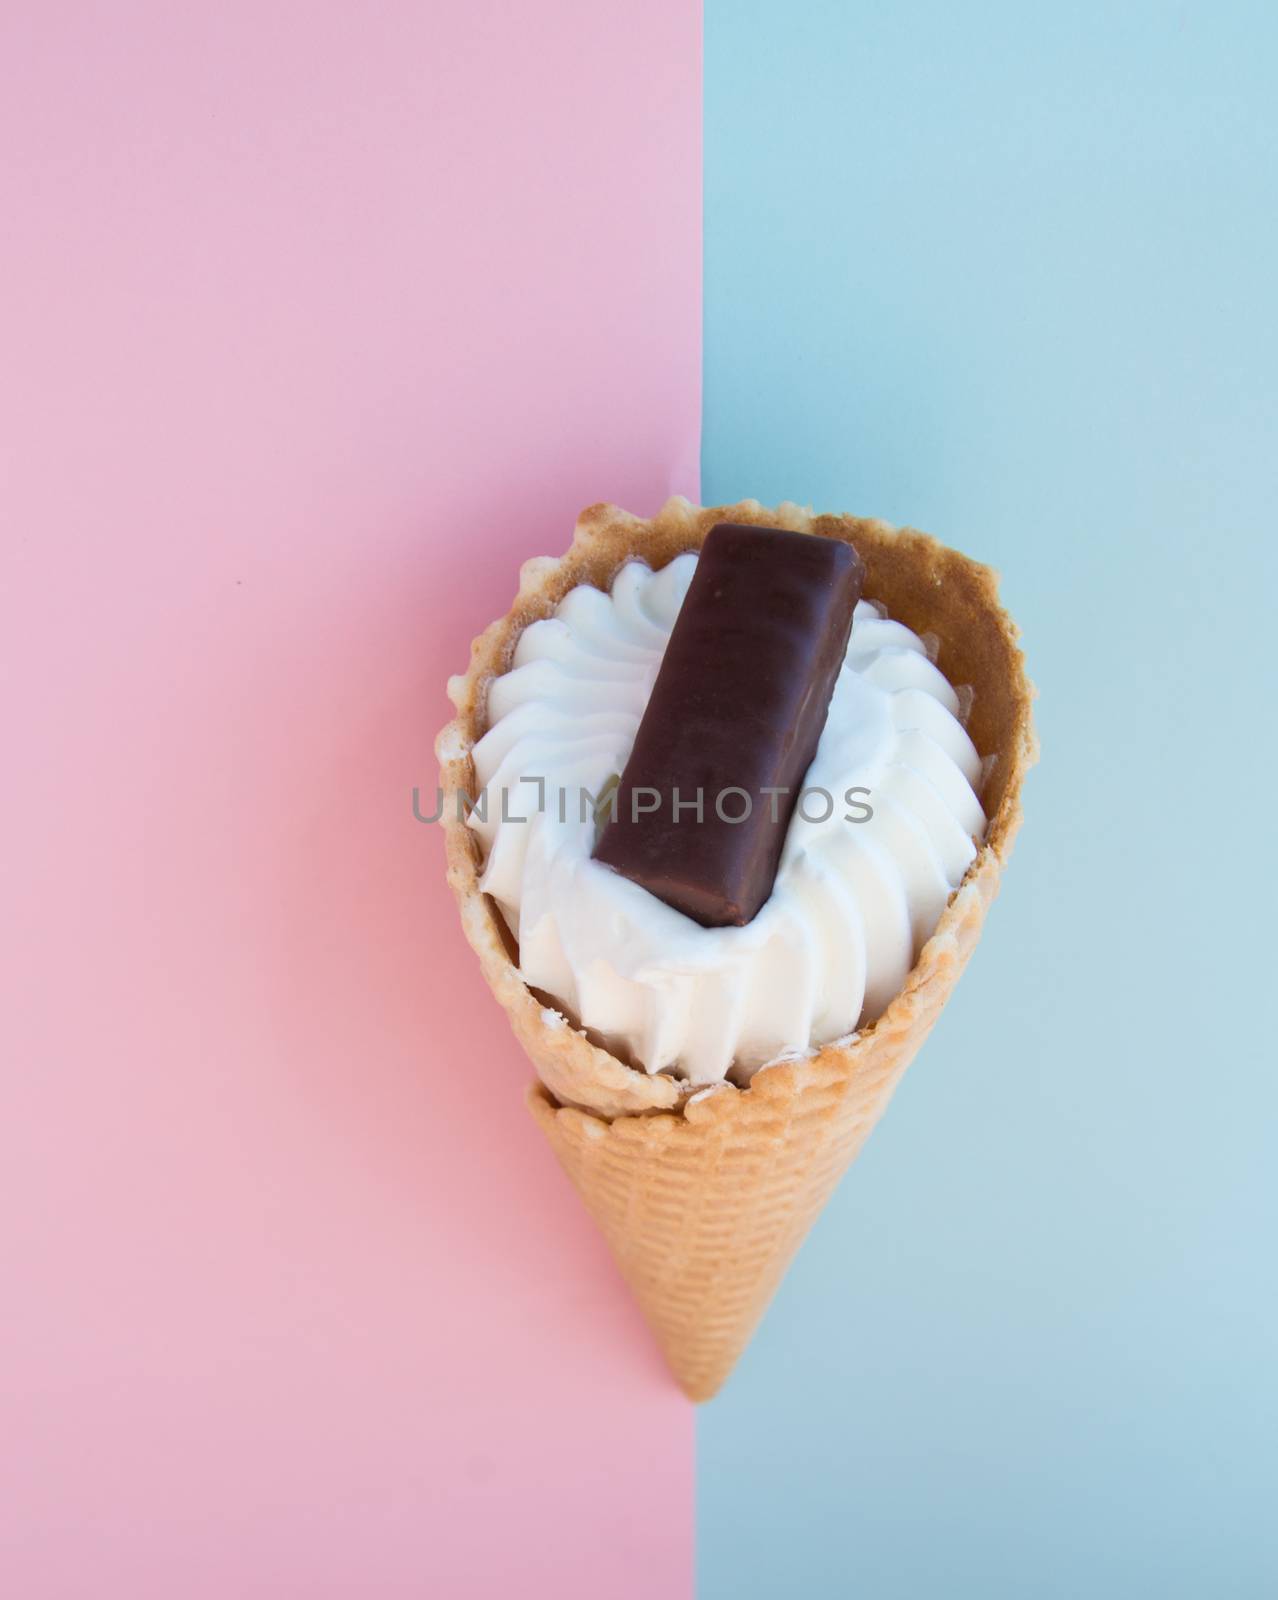 Vanilla ice cream cone with chocolate on a background of pastel colors pink and blue, top view.